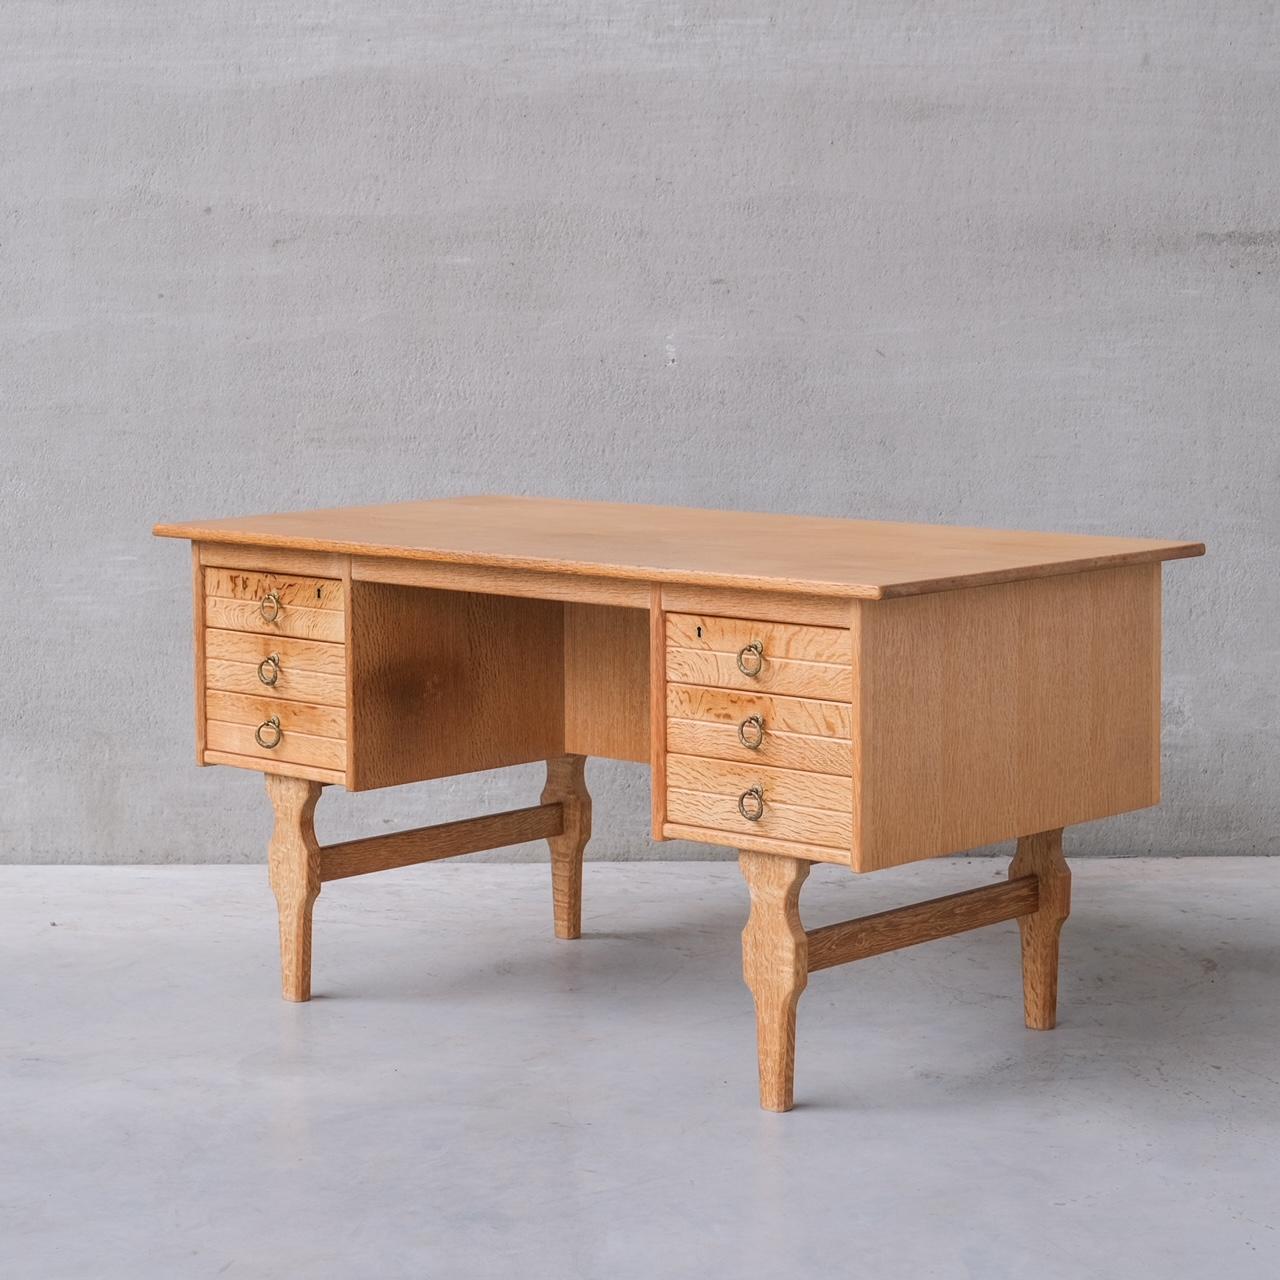 A good looking simple desk, in oak, with reverse shelf for displaying books or curios.

Denmark, c1960s.

Attributed to Henning Kjaernulf.

Good vintage condition. Some scuffs and patina commensurate with age.

Internal ref: